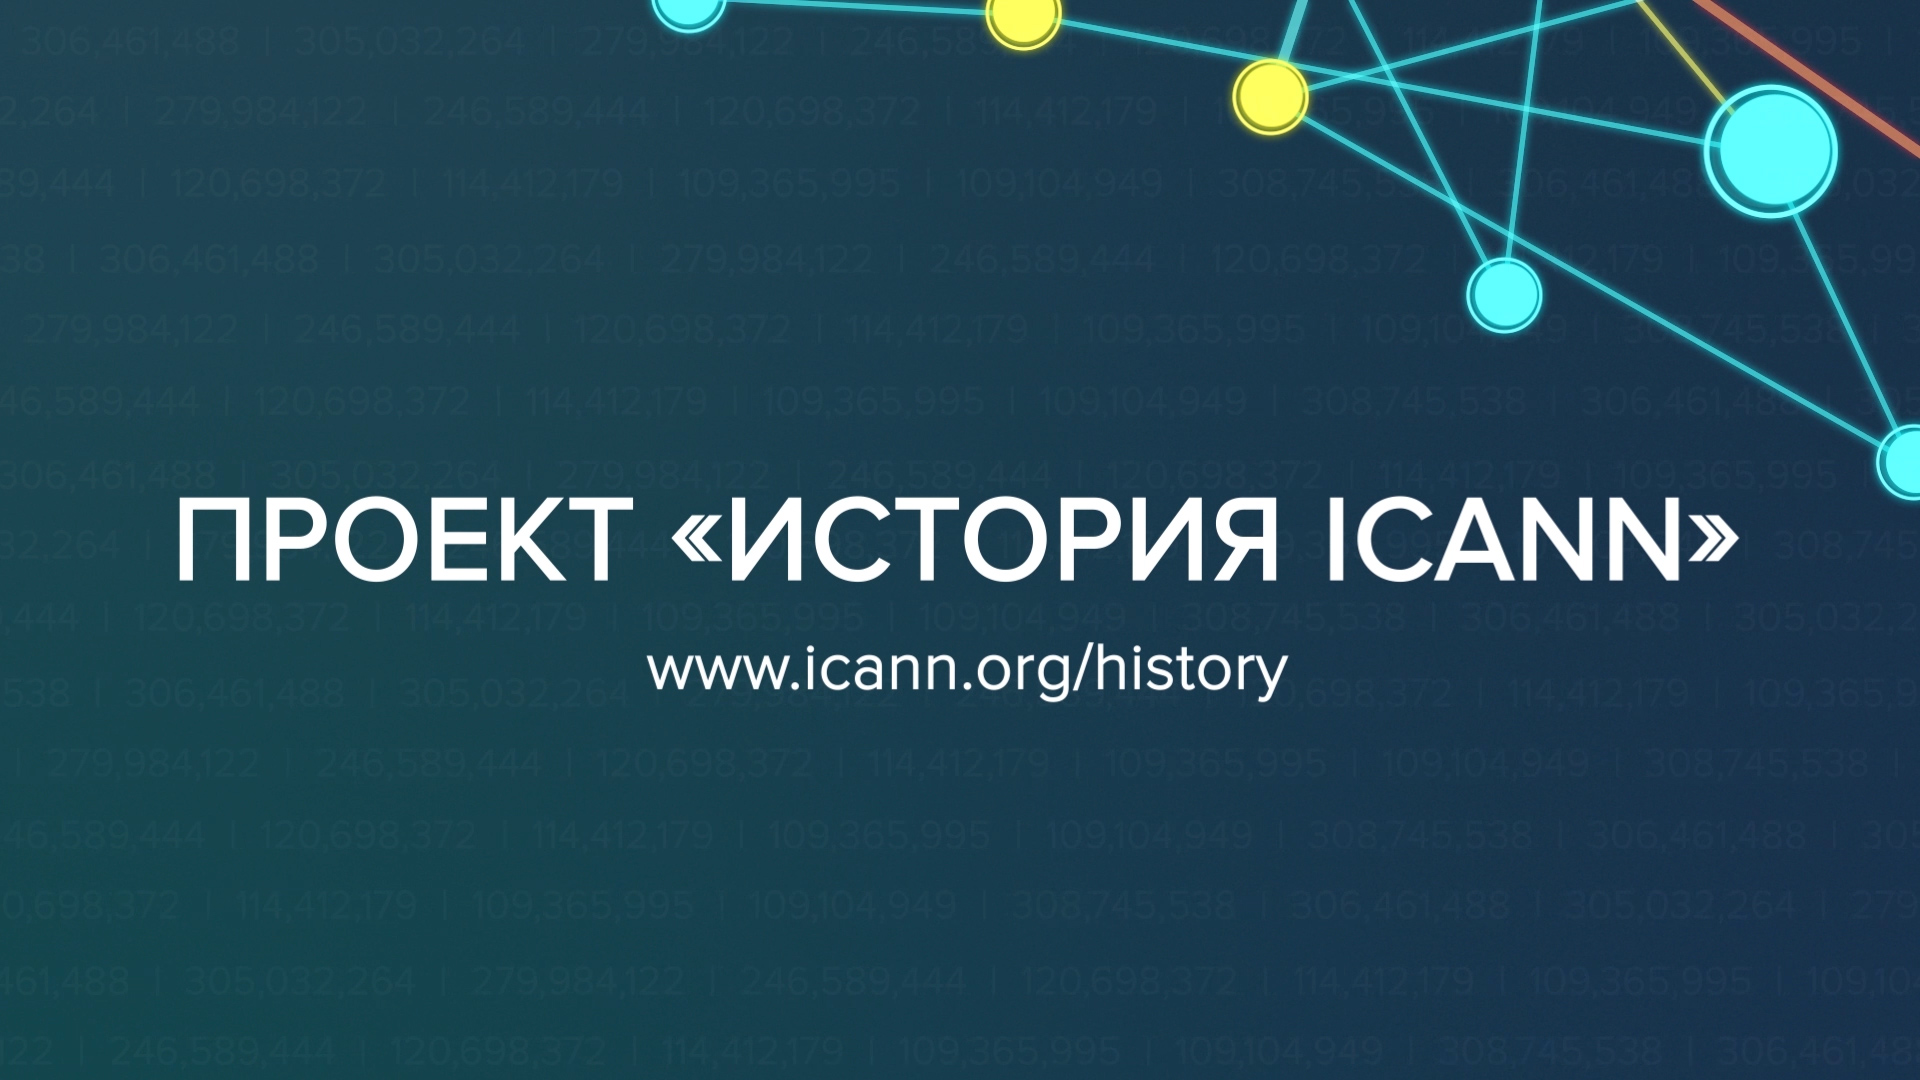 Opening introduction   history project rus.00 00 08 16.still001